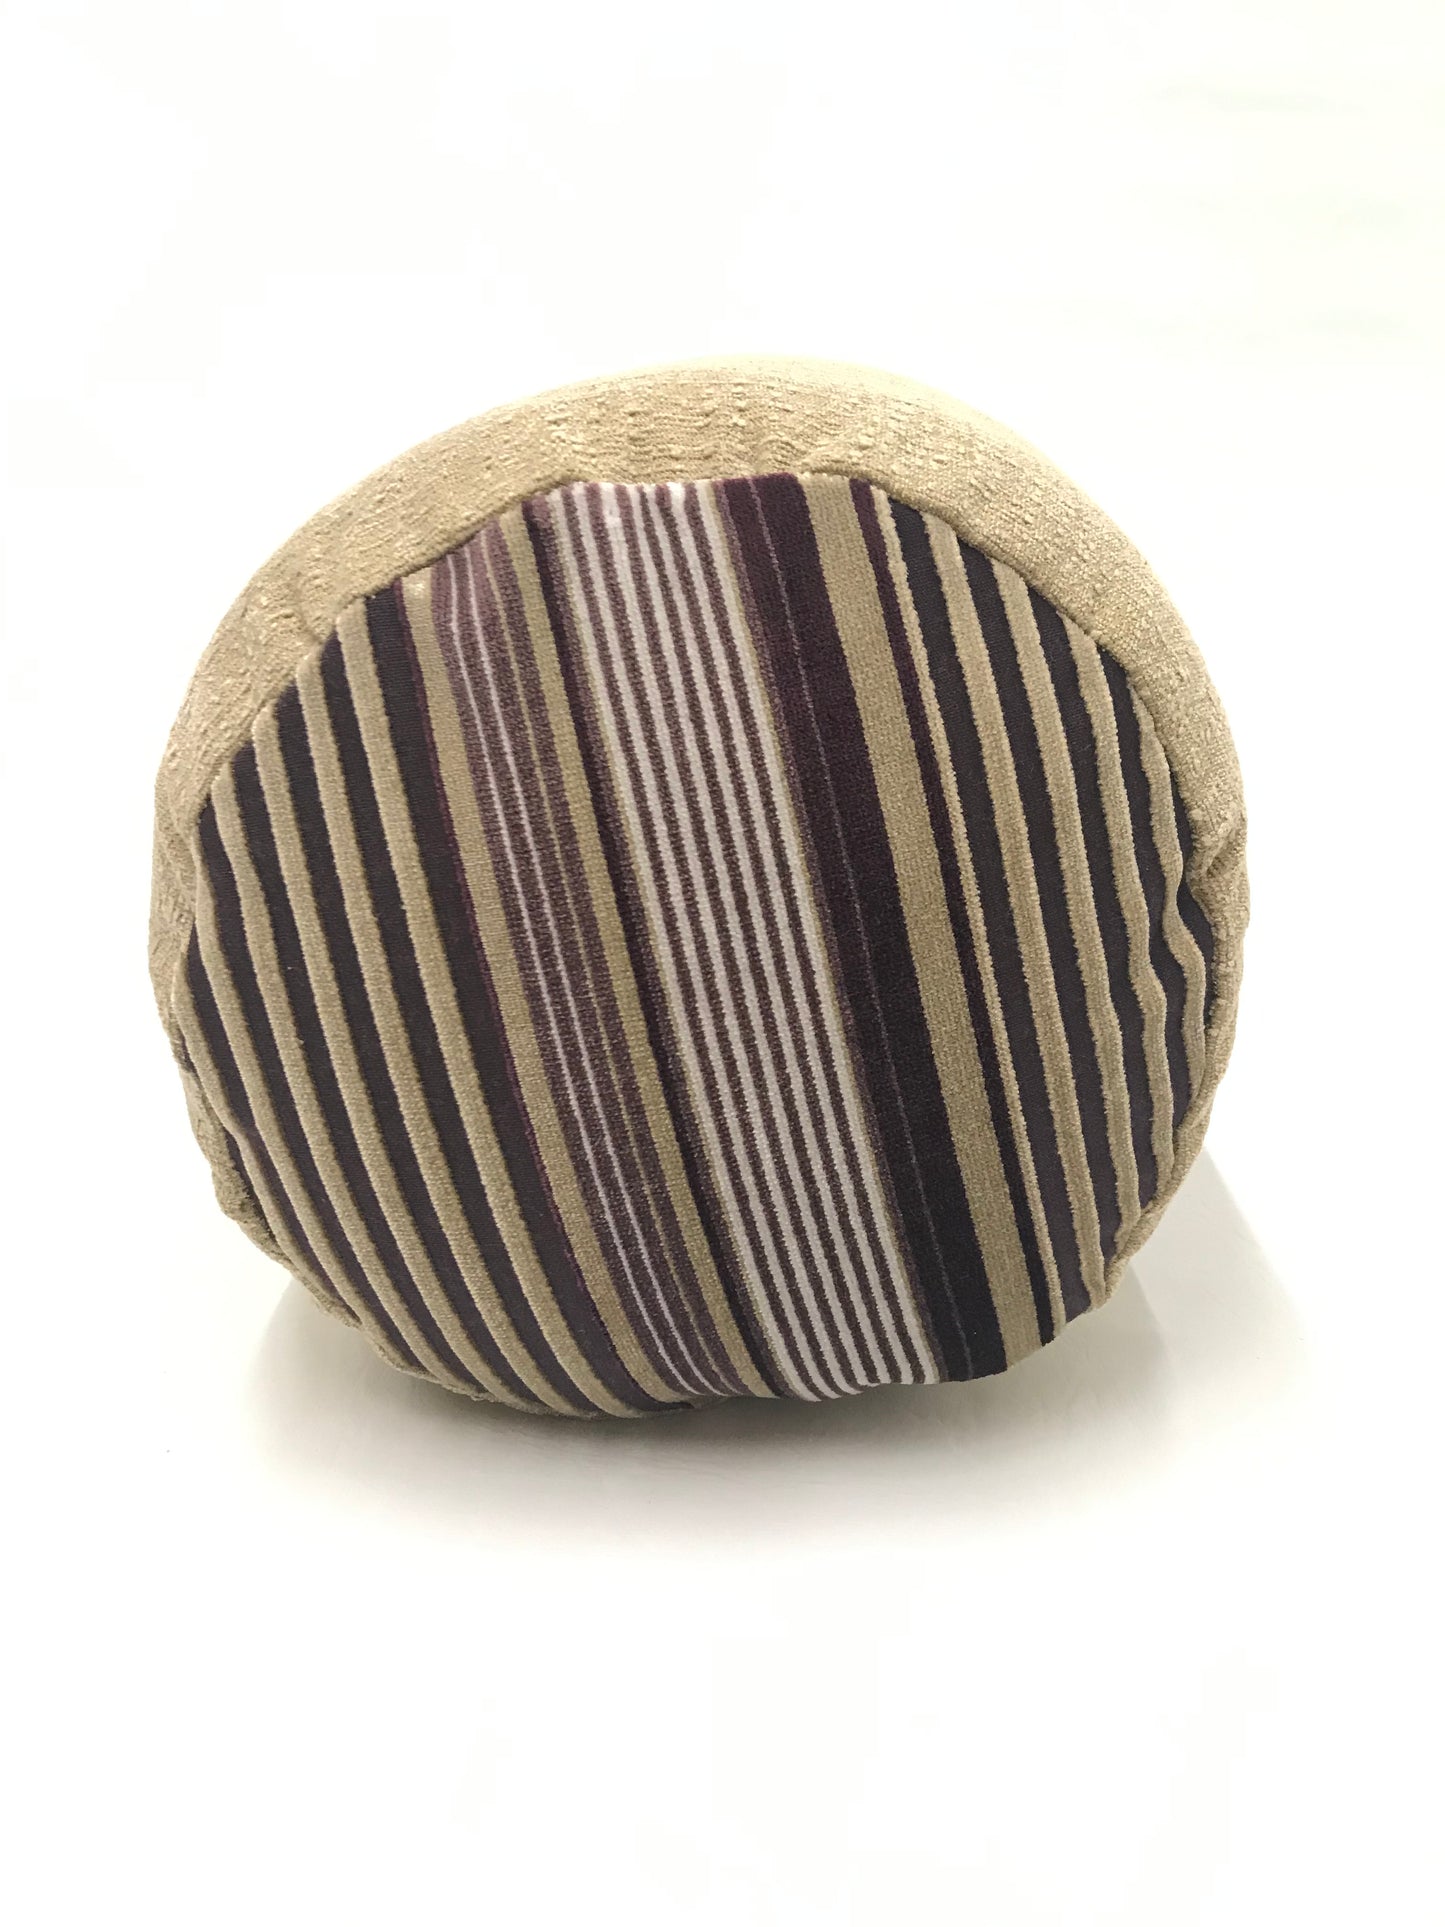 Round yoga bolster in plush brown fabric with matching purple and brown stripe fabric. Allergy conscious fill with removeable cover. Made in Canada by My Yoga Room Elements